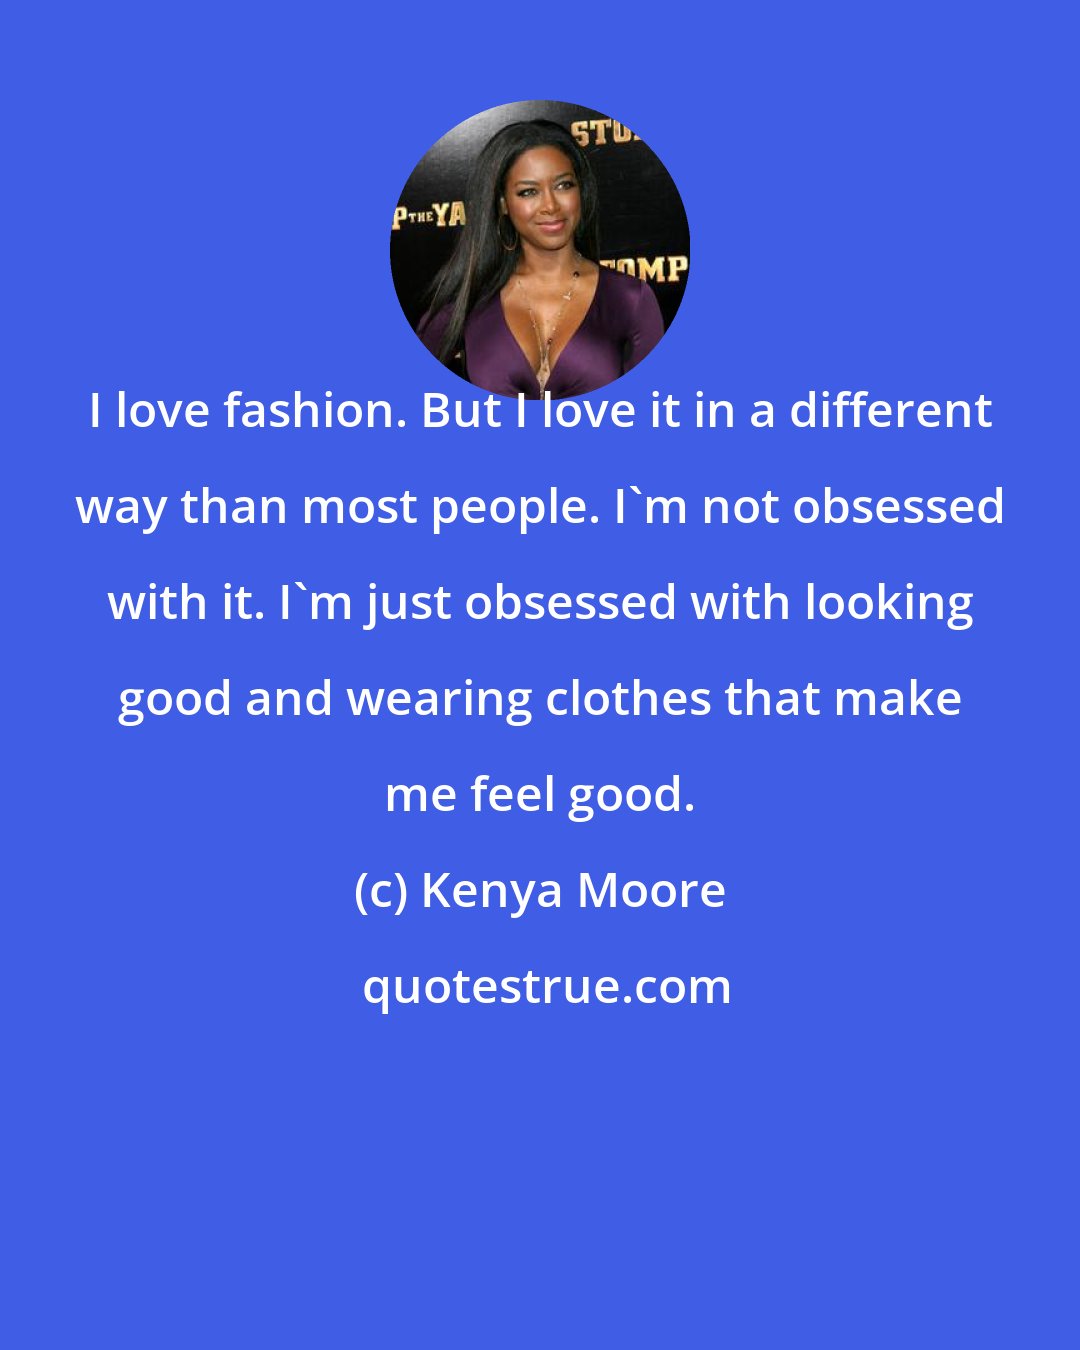 Kenya Moore: I love fashion. But I love it in a different way than most people. I'm not obsessed with it. I'm just obsessed with looking good and wearing clothes that make me feel good.